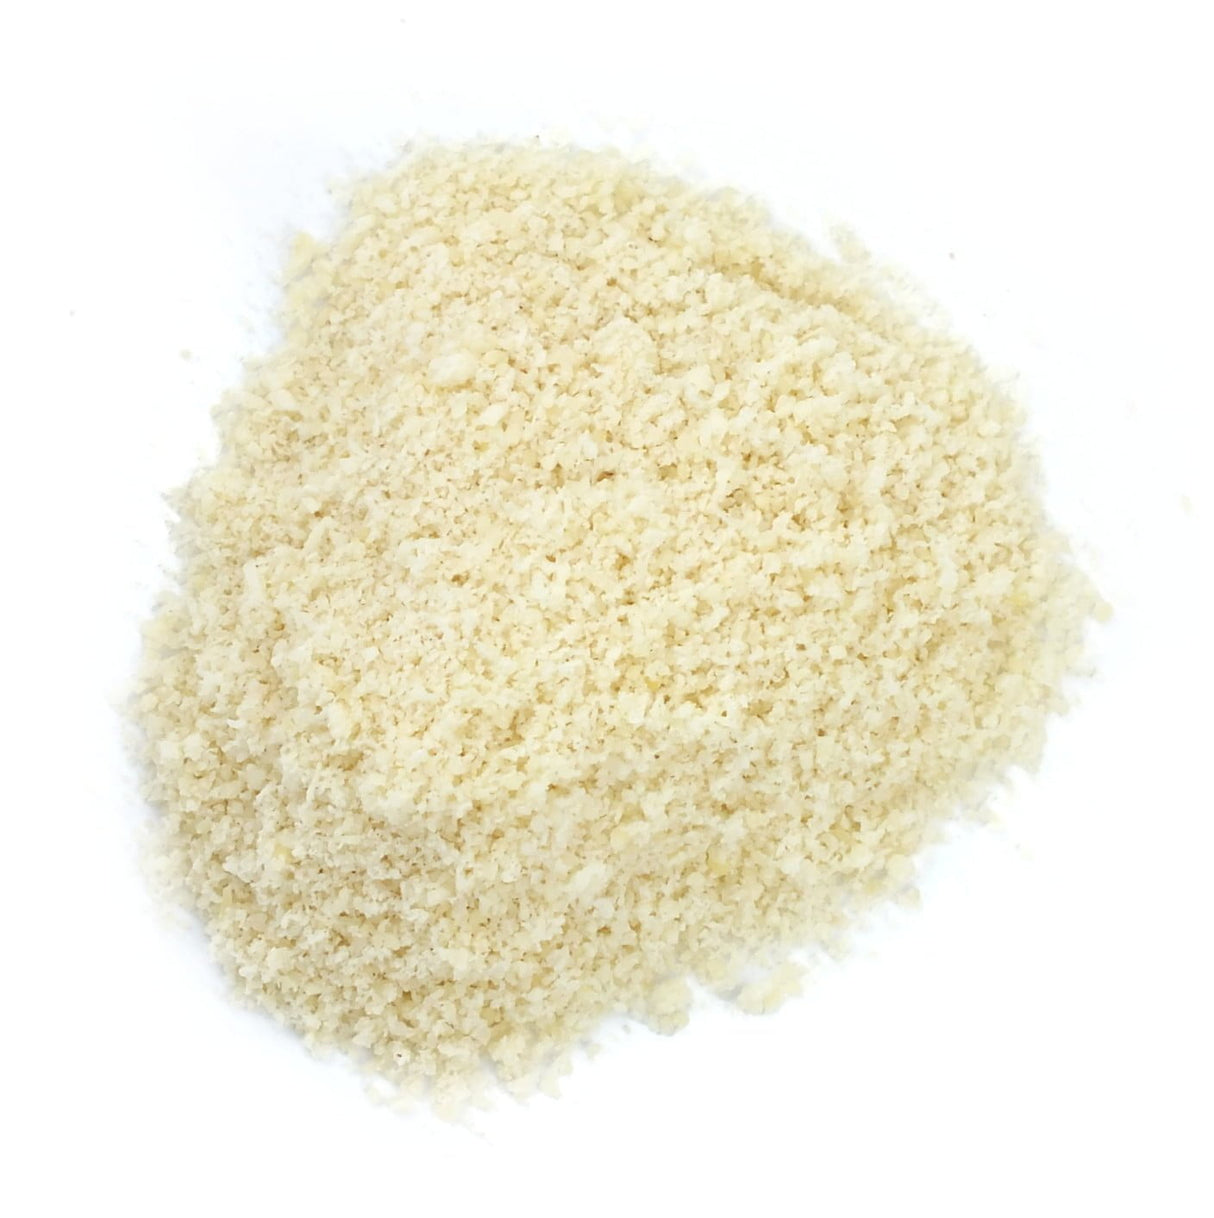 Blanched Ground Almond Flour